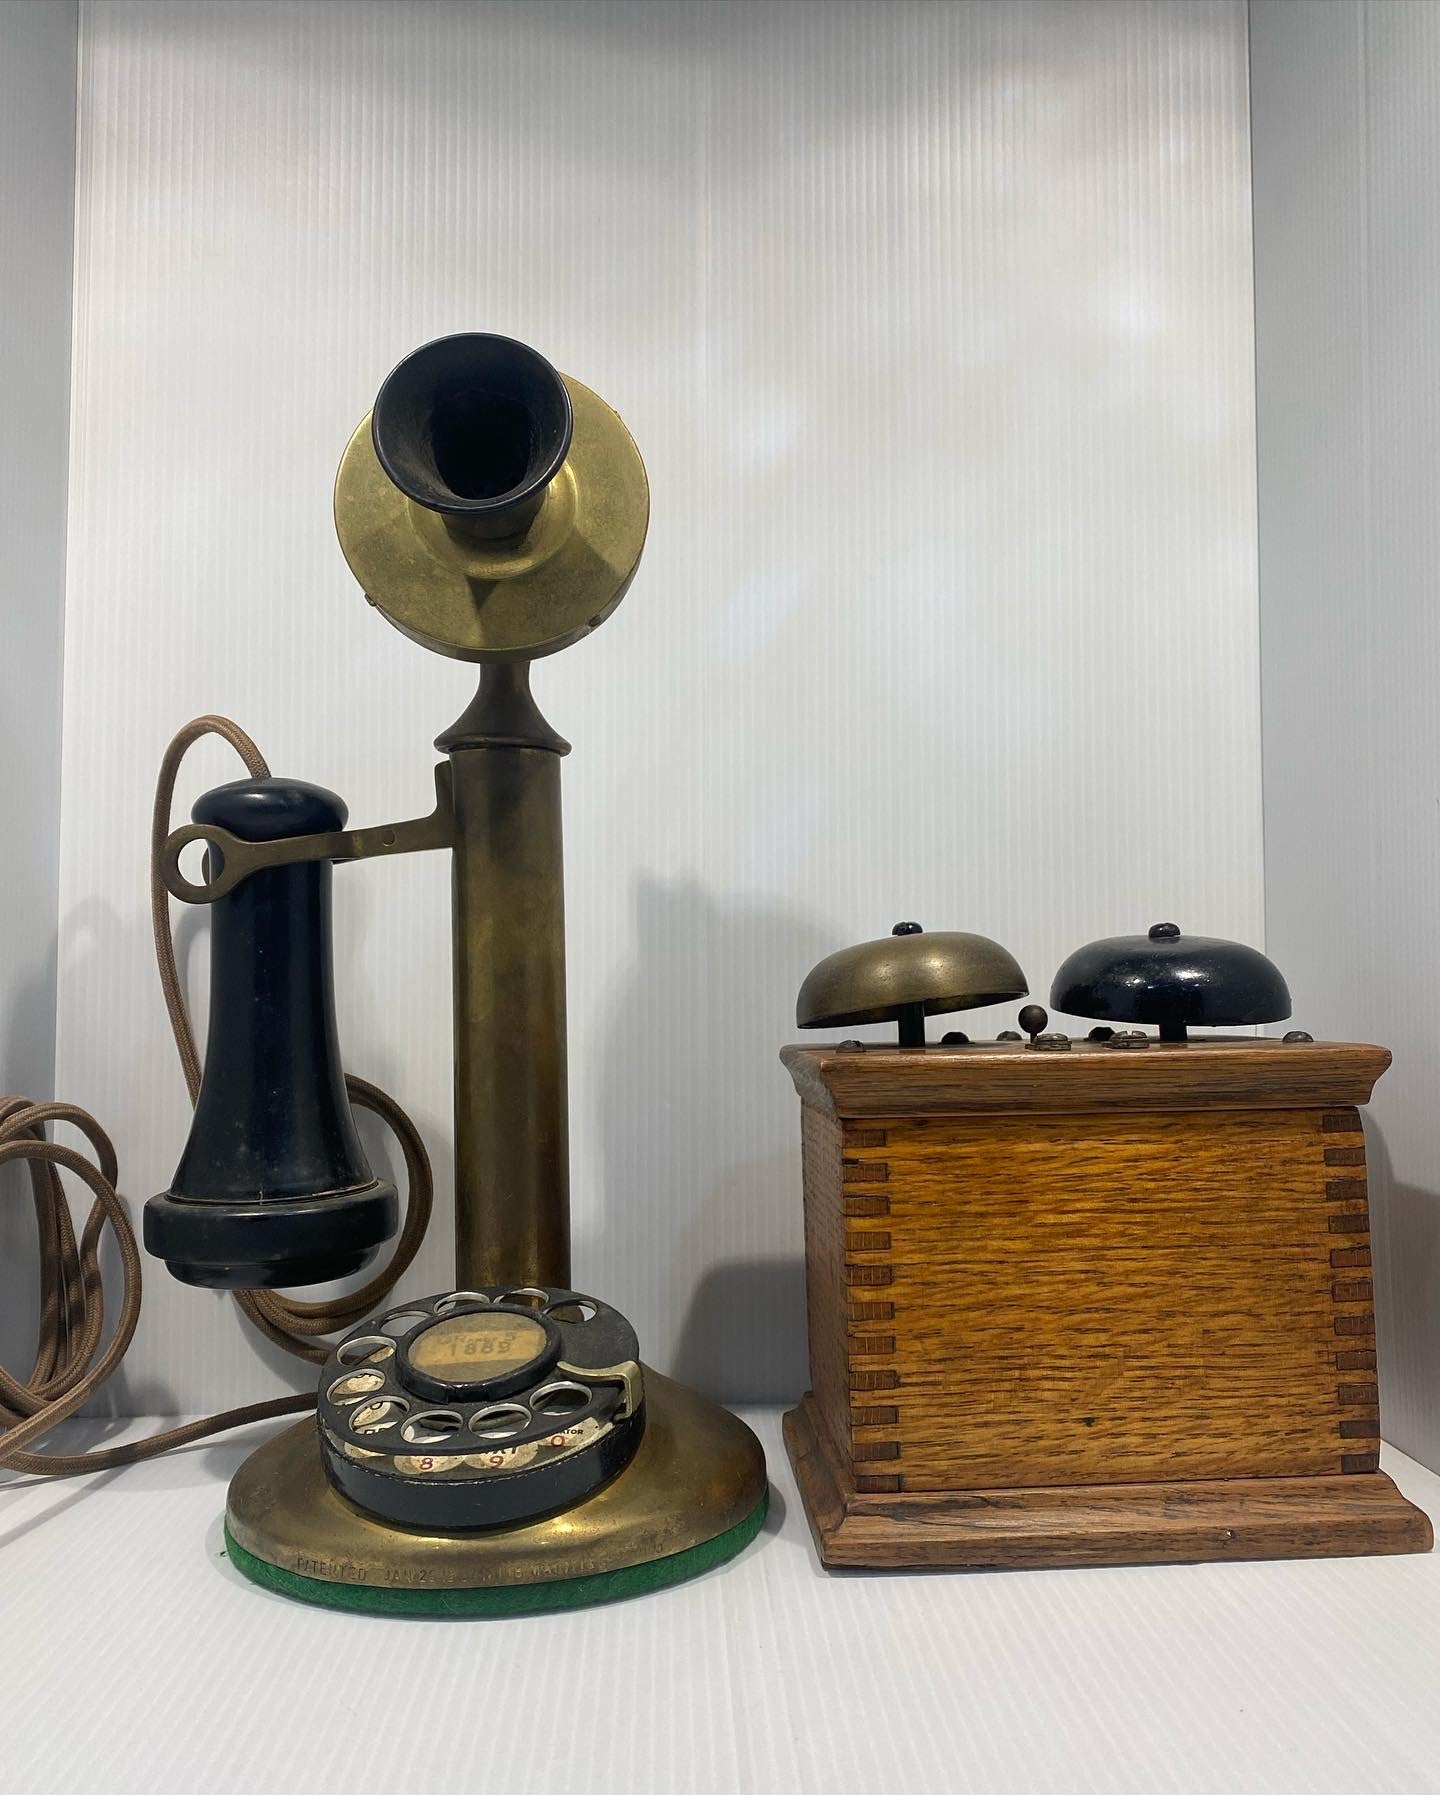 American Bell Candlestick Telephone. 1910